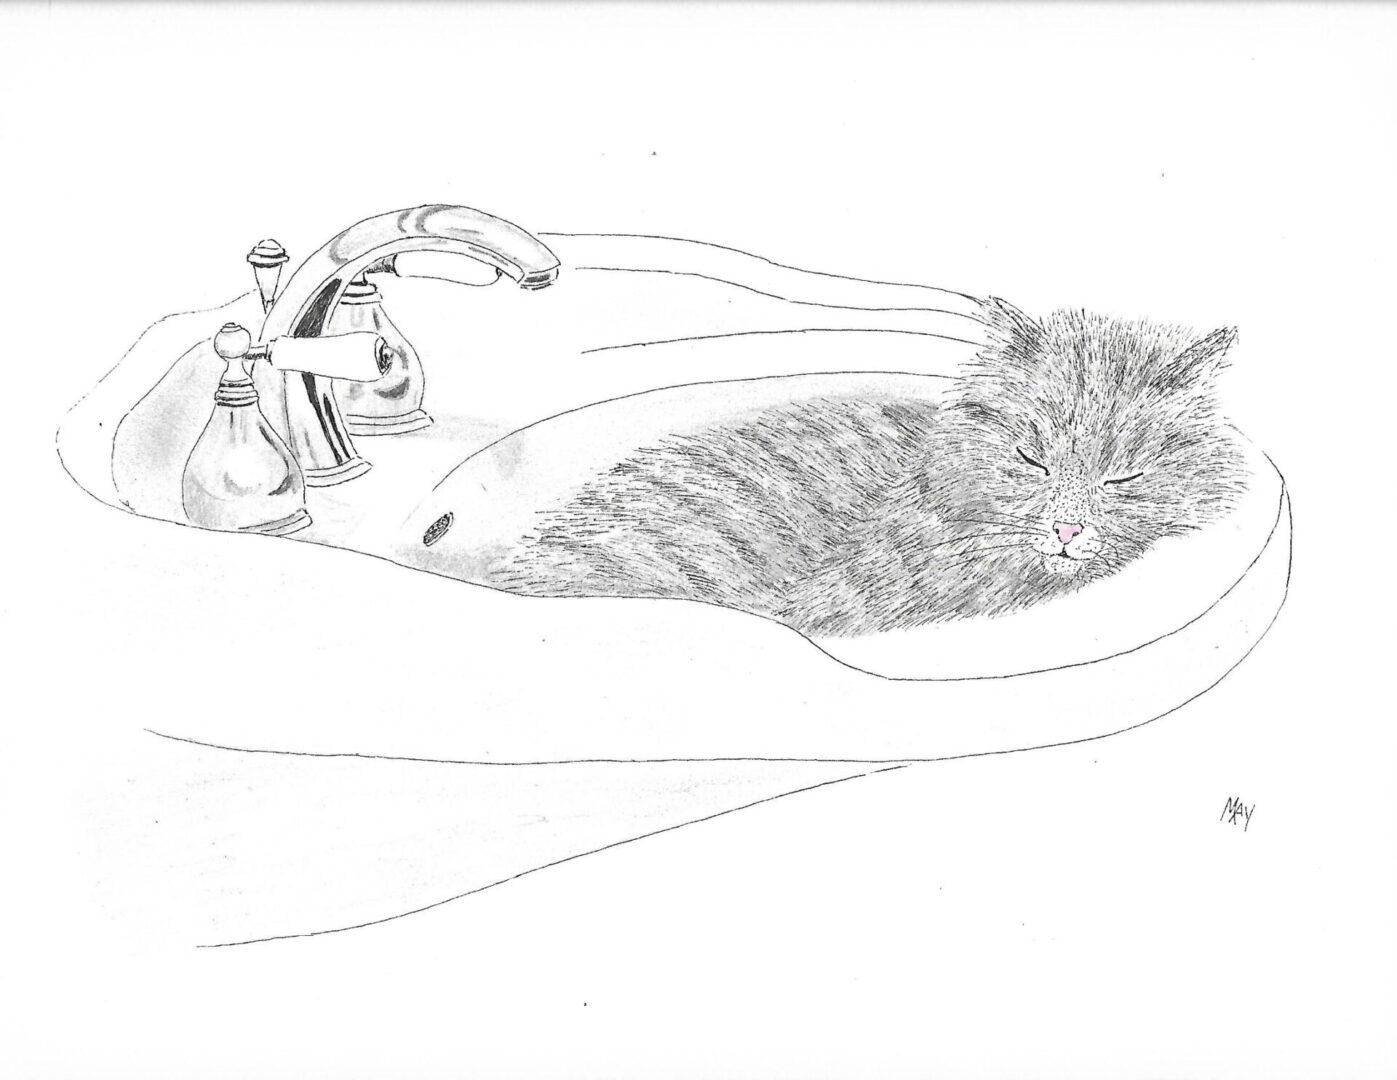 A cat sleeping on the sink